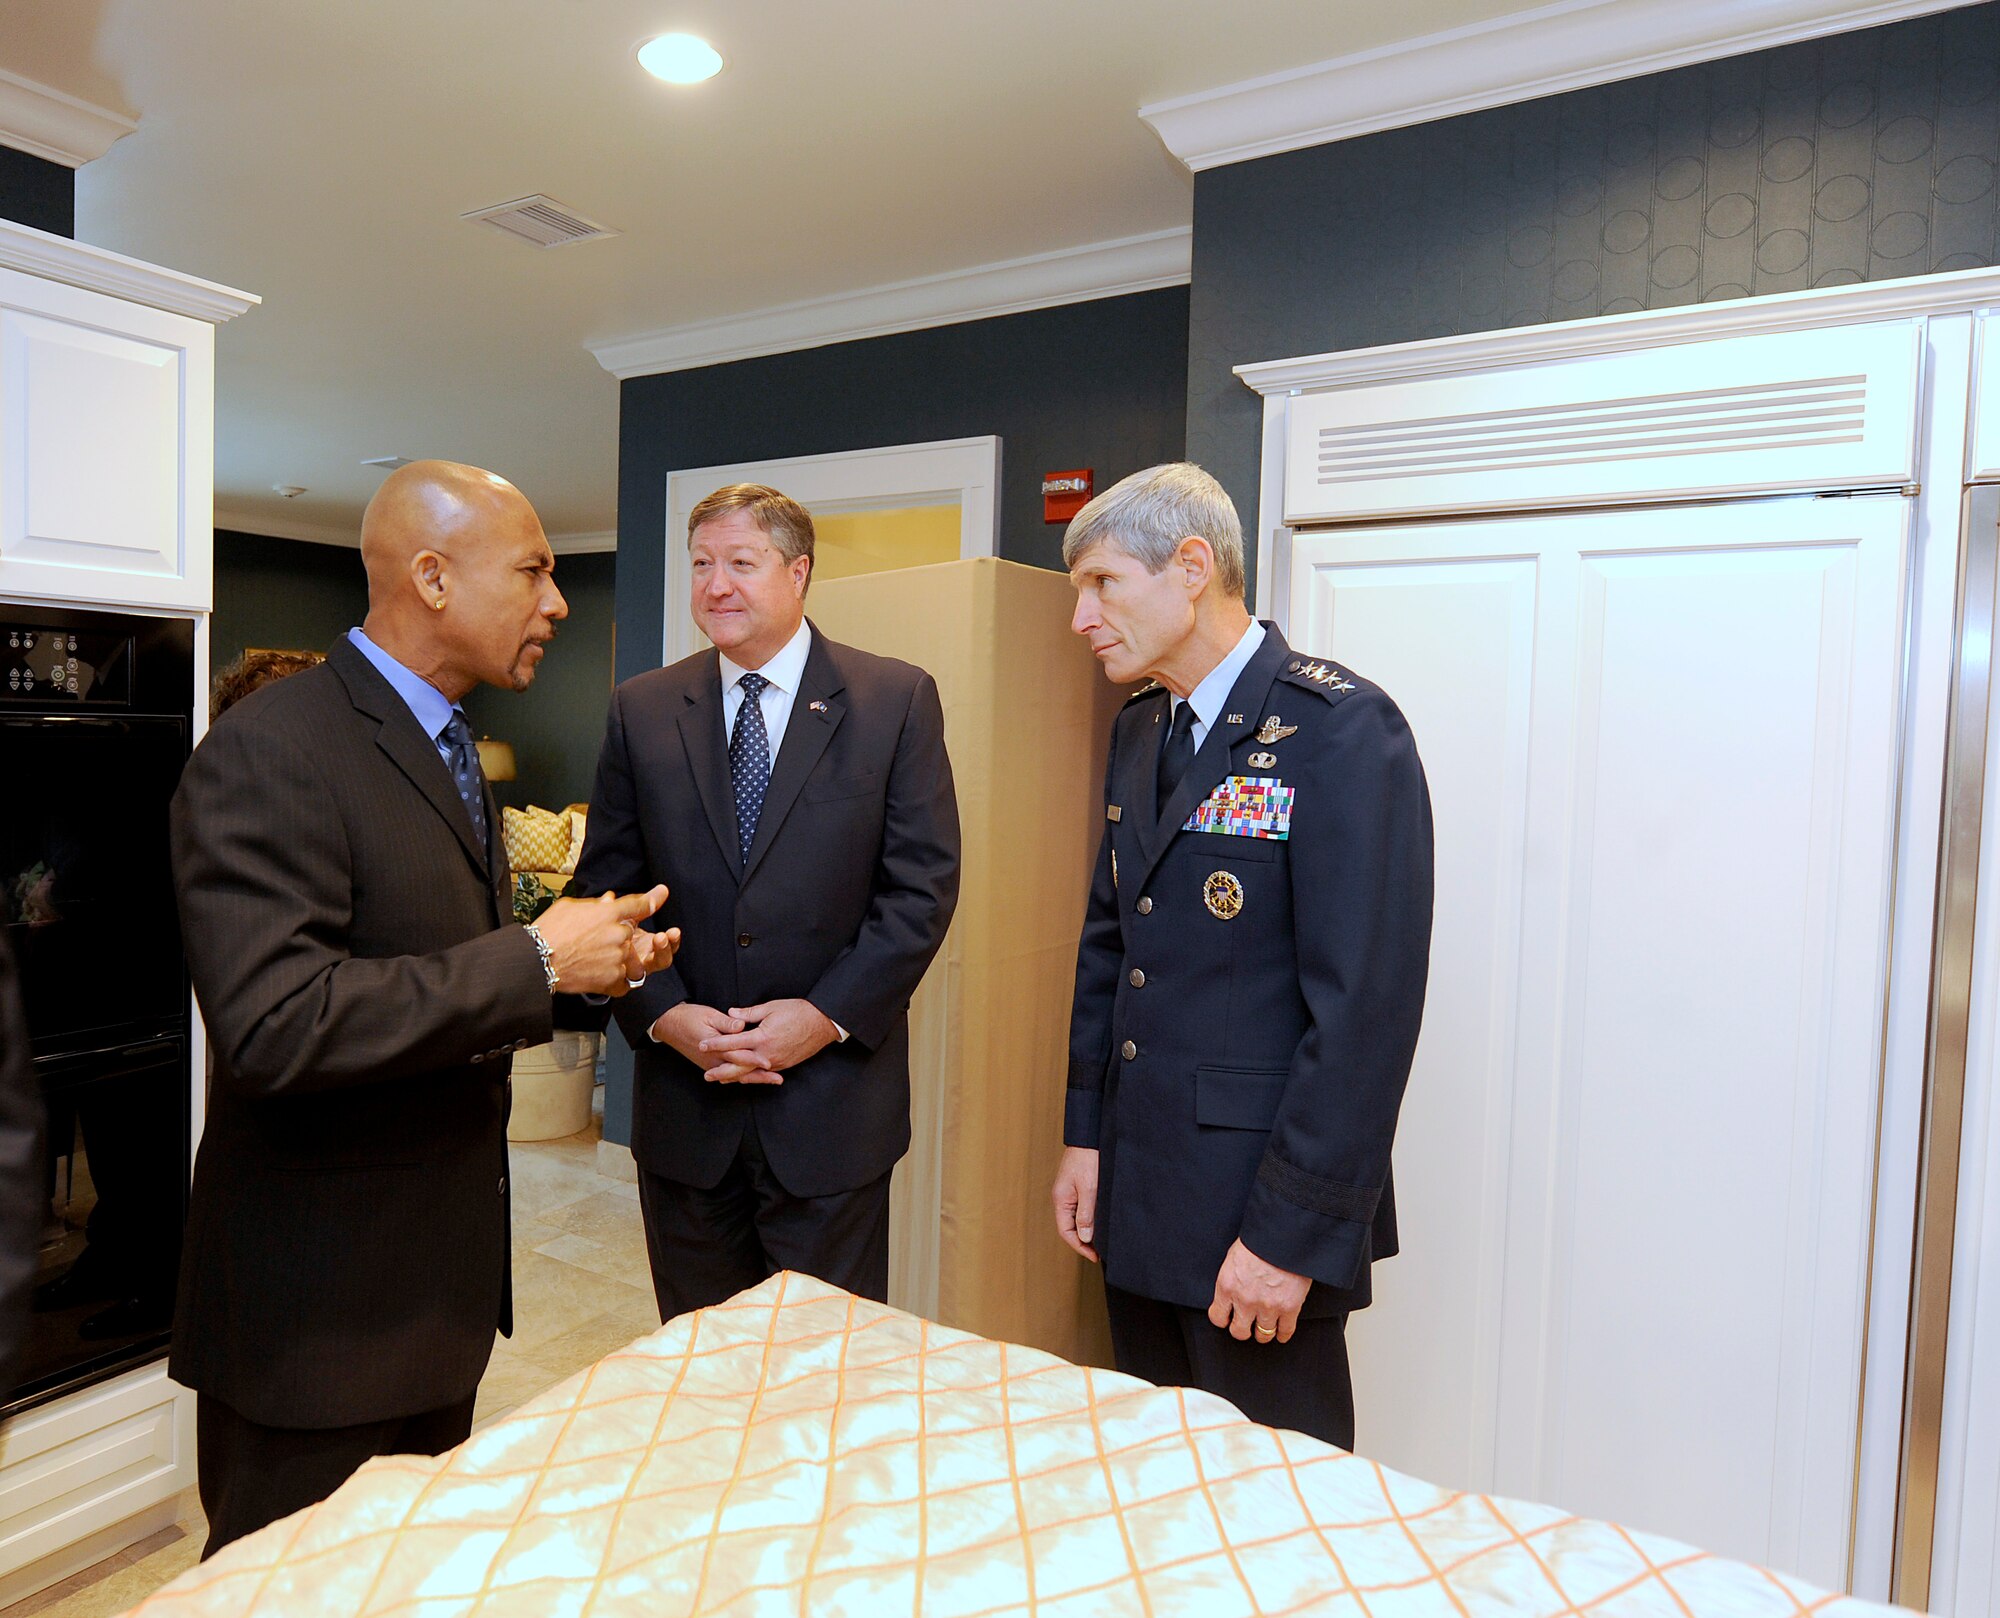 Celebrity talk show host Montel Williams talks with Secretary of the Air Force Michael Donley and Air Force Chief of Staff Gen. Norton Schwartz at Dover Air Force Base, Del., on Nov. 10, 2010.  The three helped dedicate the new Fisher House for Families of the Fallen during a ceremony there.  (U.S. Air Force photo/Scott M. Ash)
